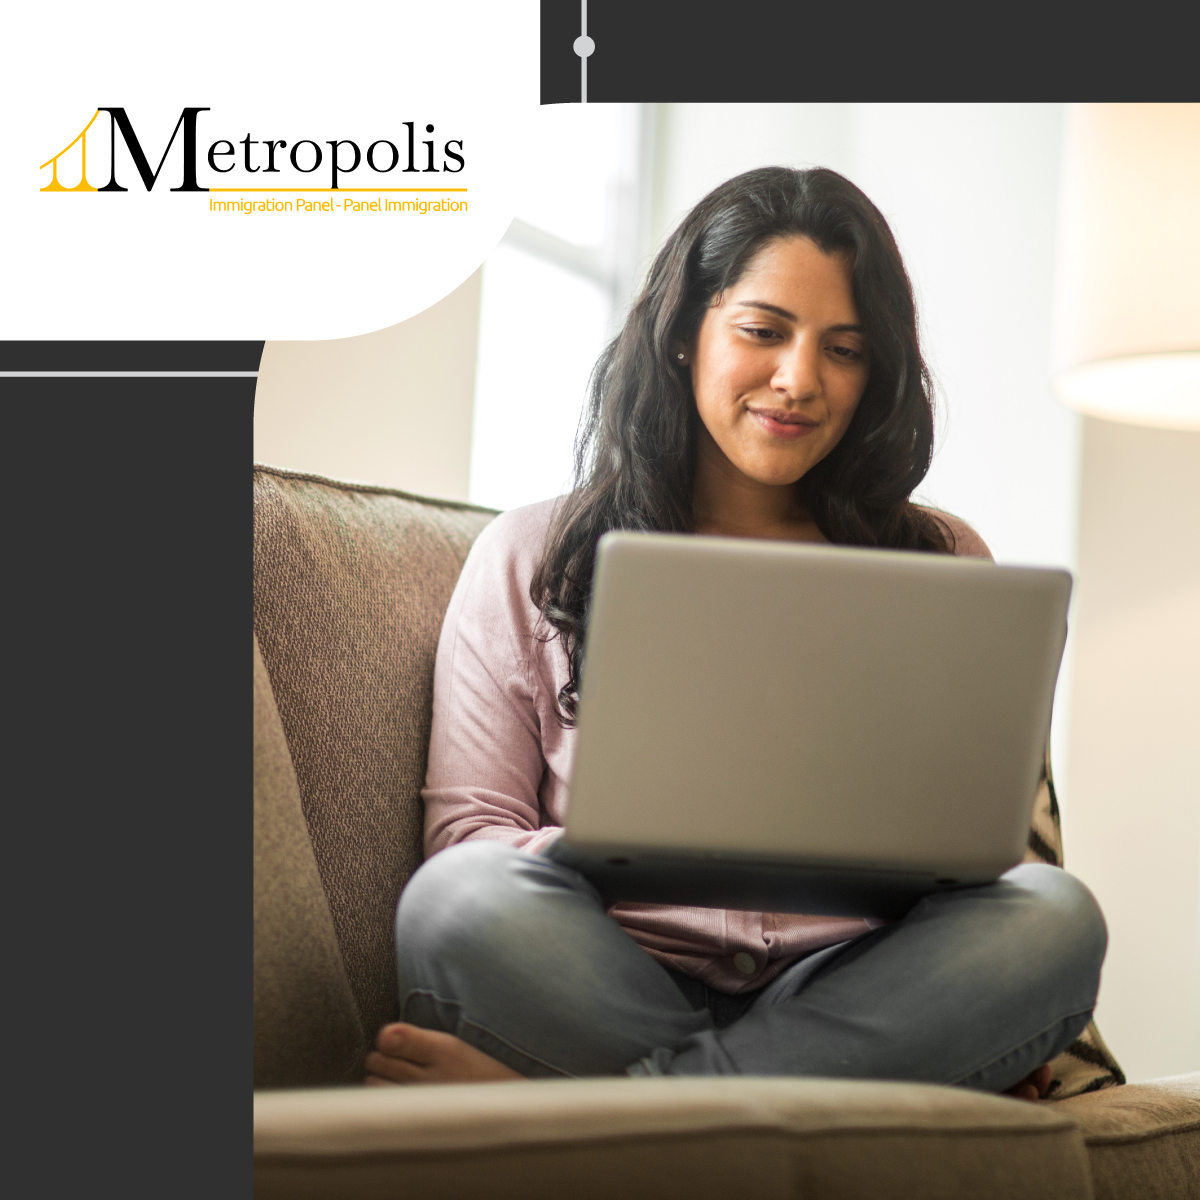 Woman sitting on couch with laptop on lap and Metropolis Institute logo in background